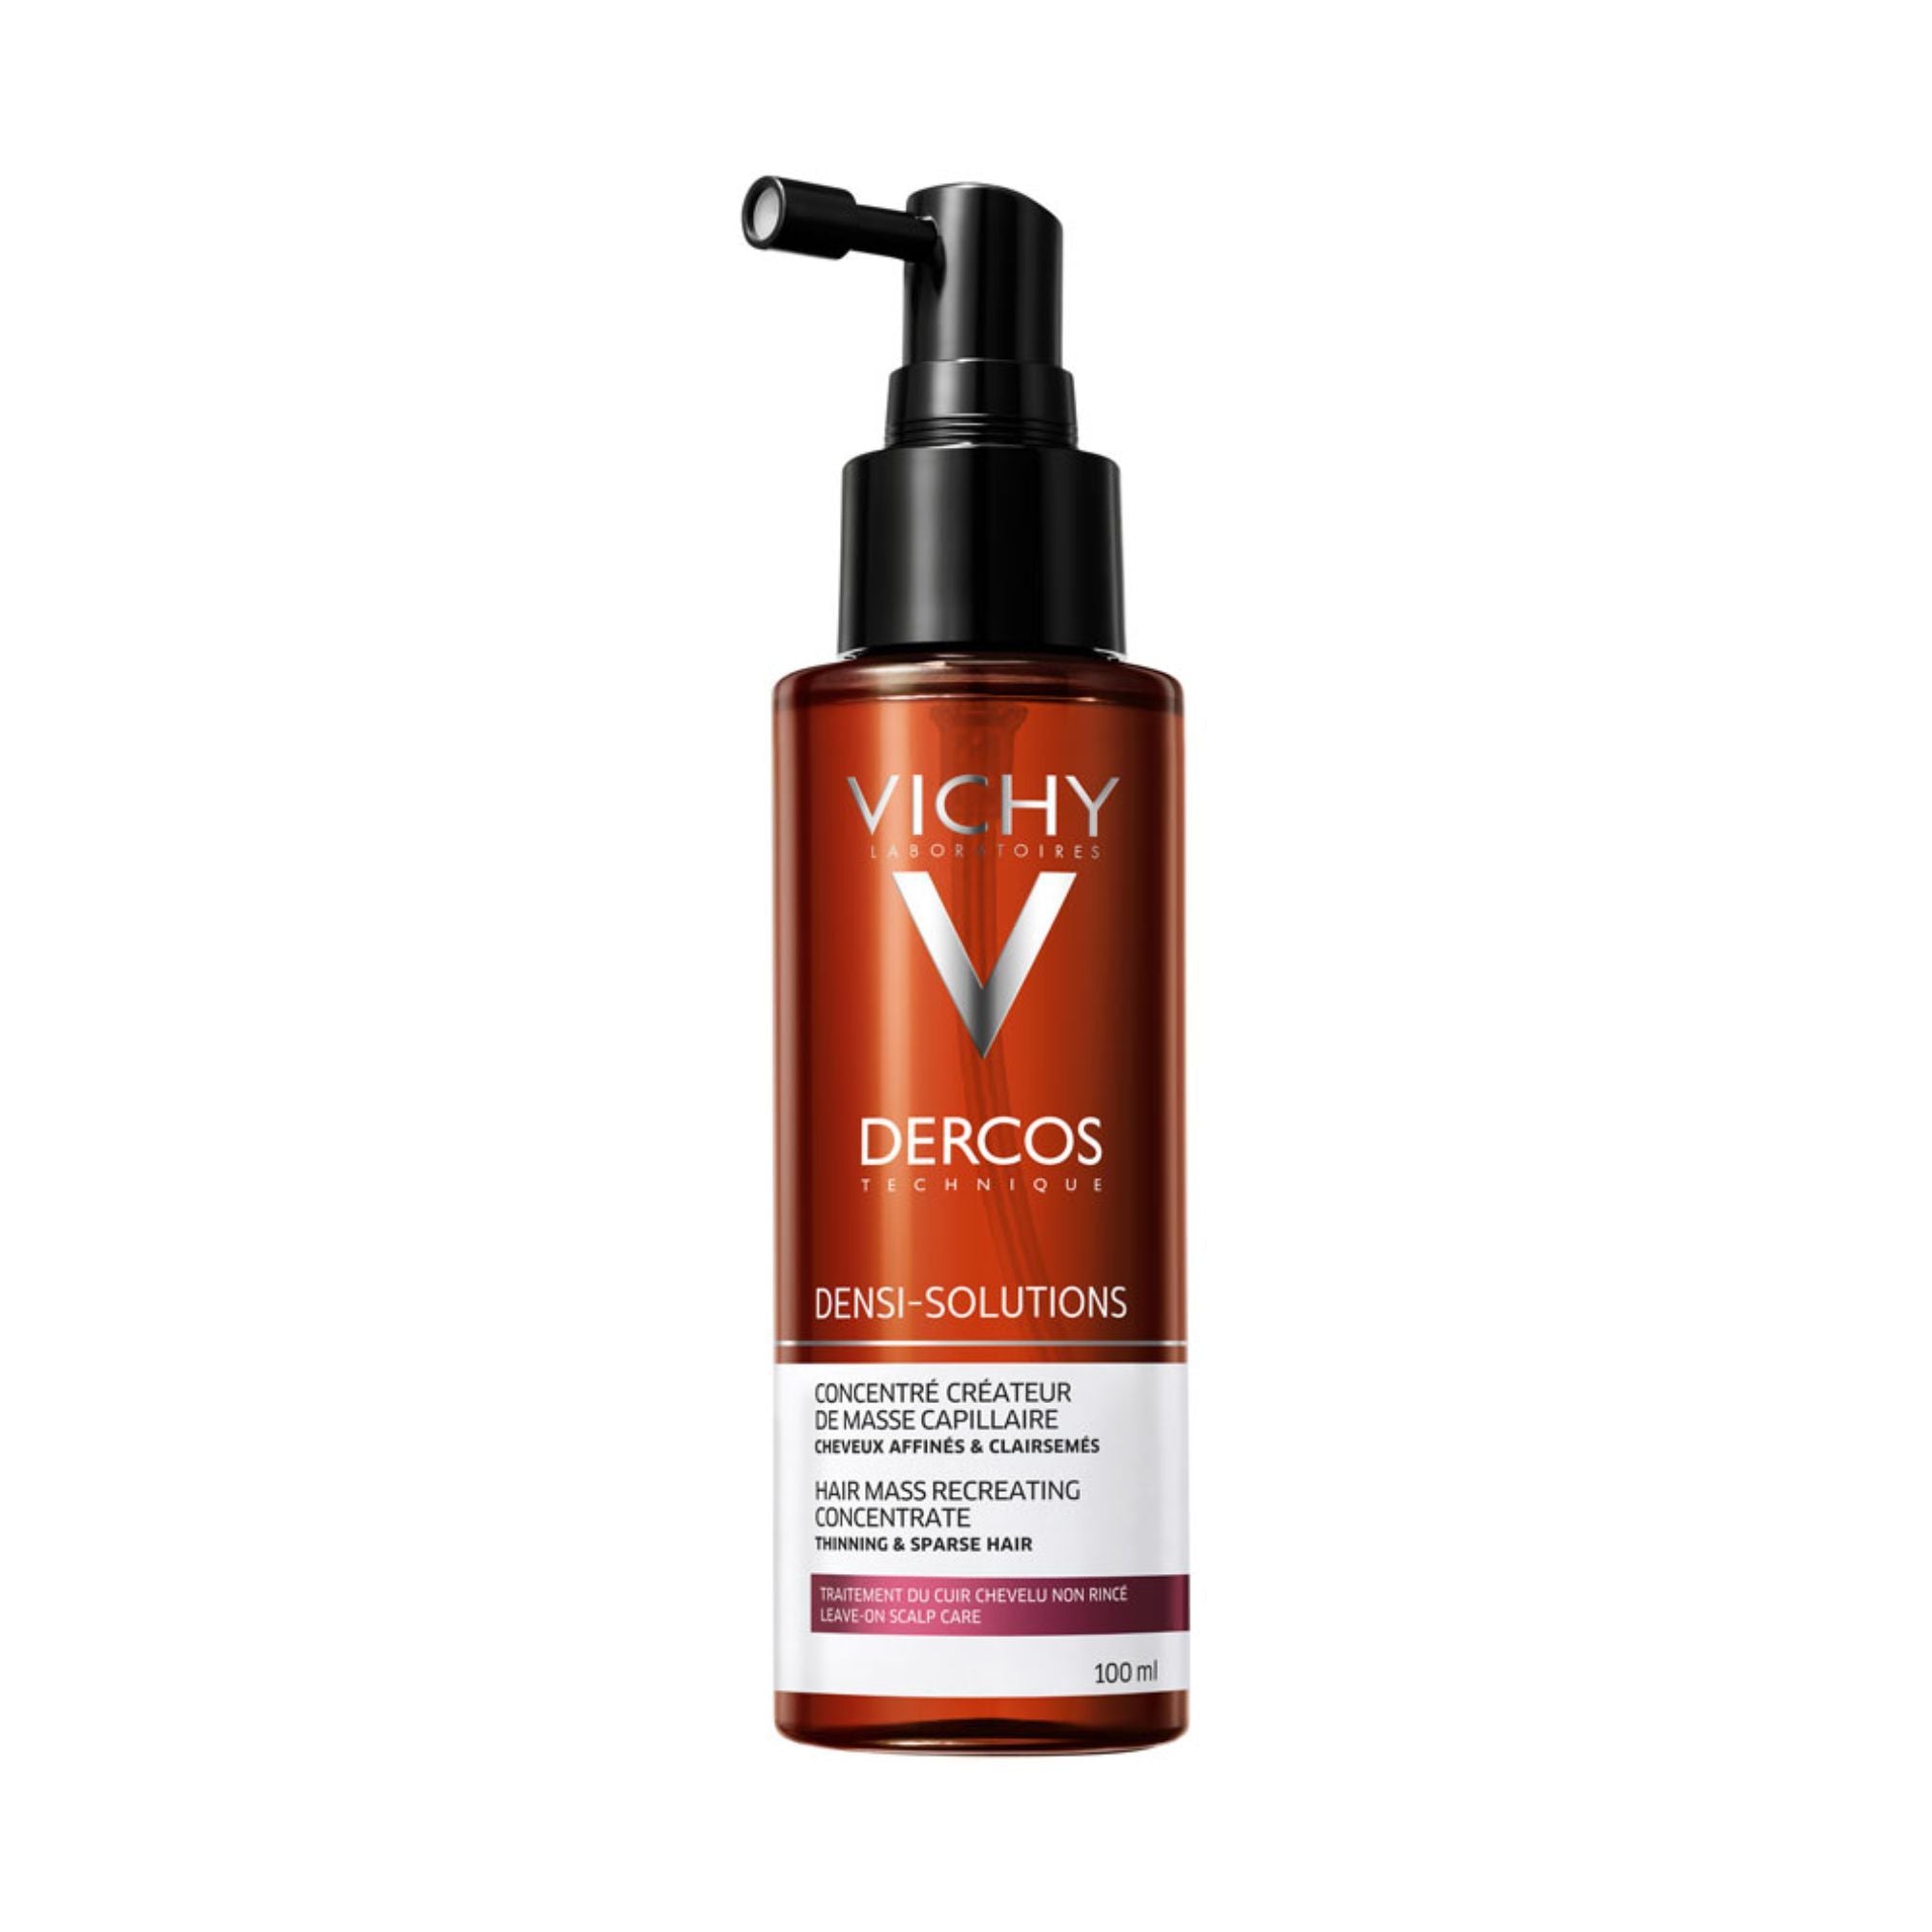 Vichy Dercos Technique Densi-Solutions Hair Mass Recreating Concentrate 100ml